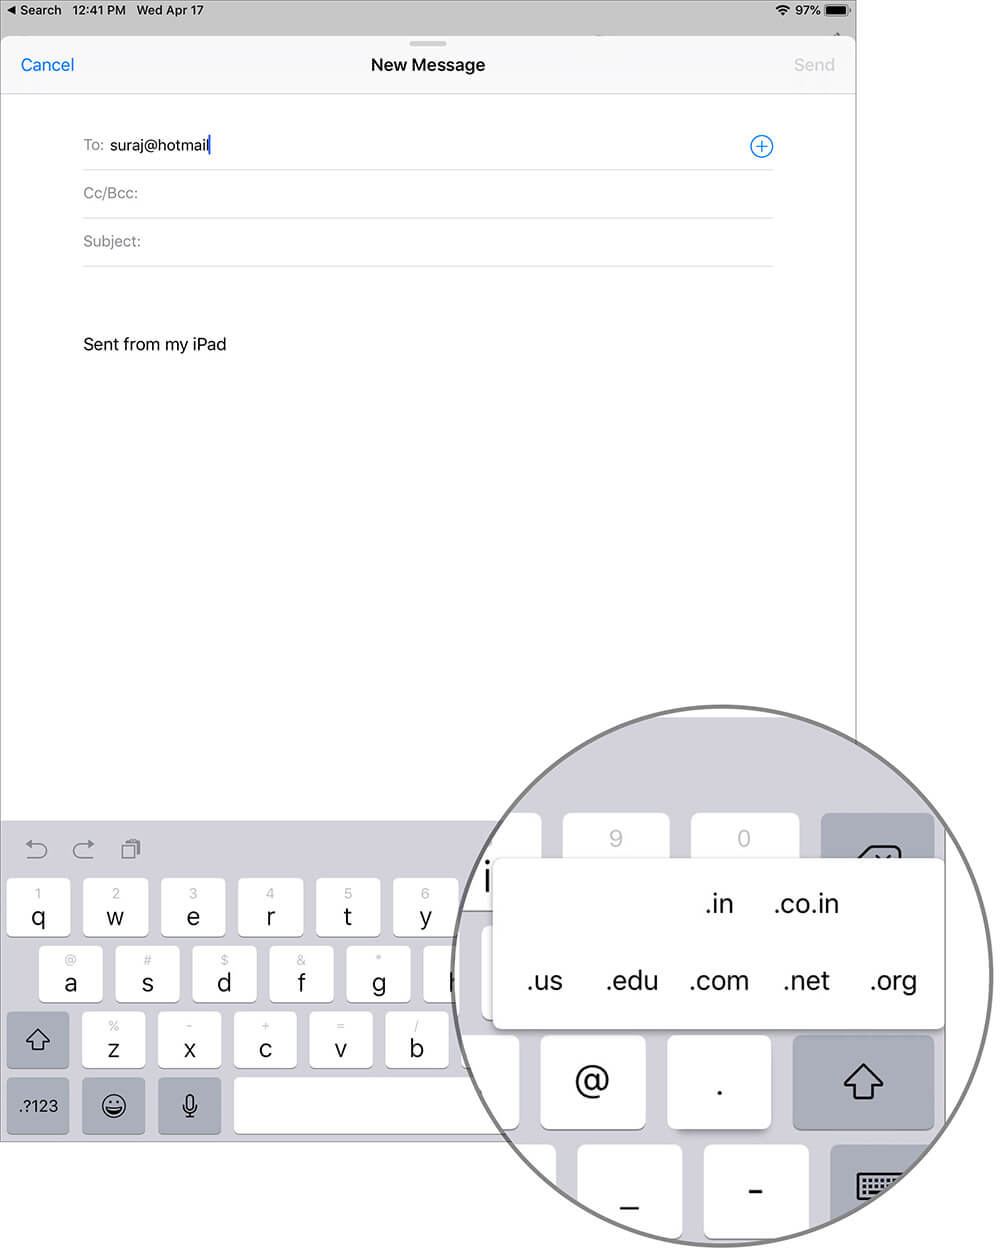 Access Top Level Domain Keyboard Shortcut in Mail app for iPad